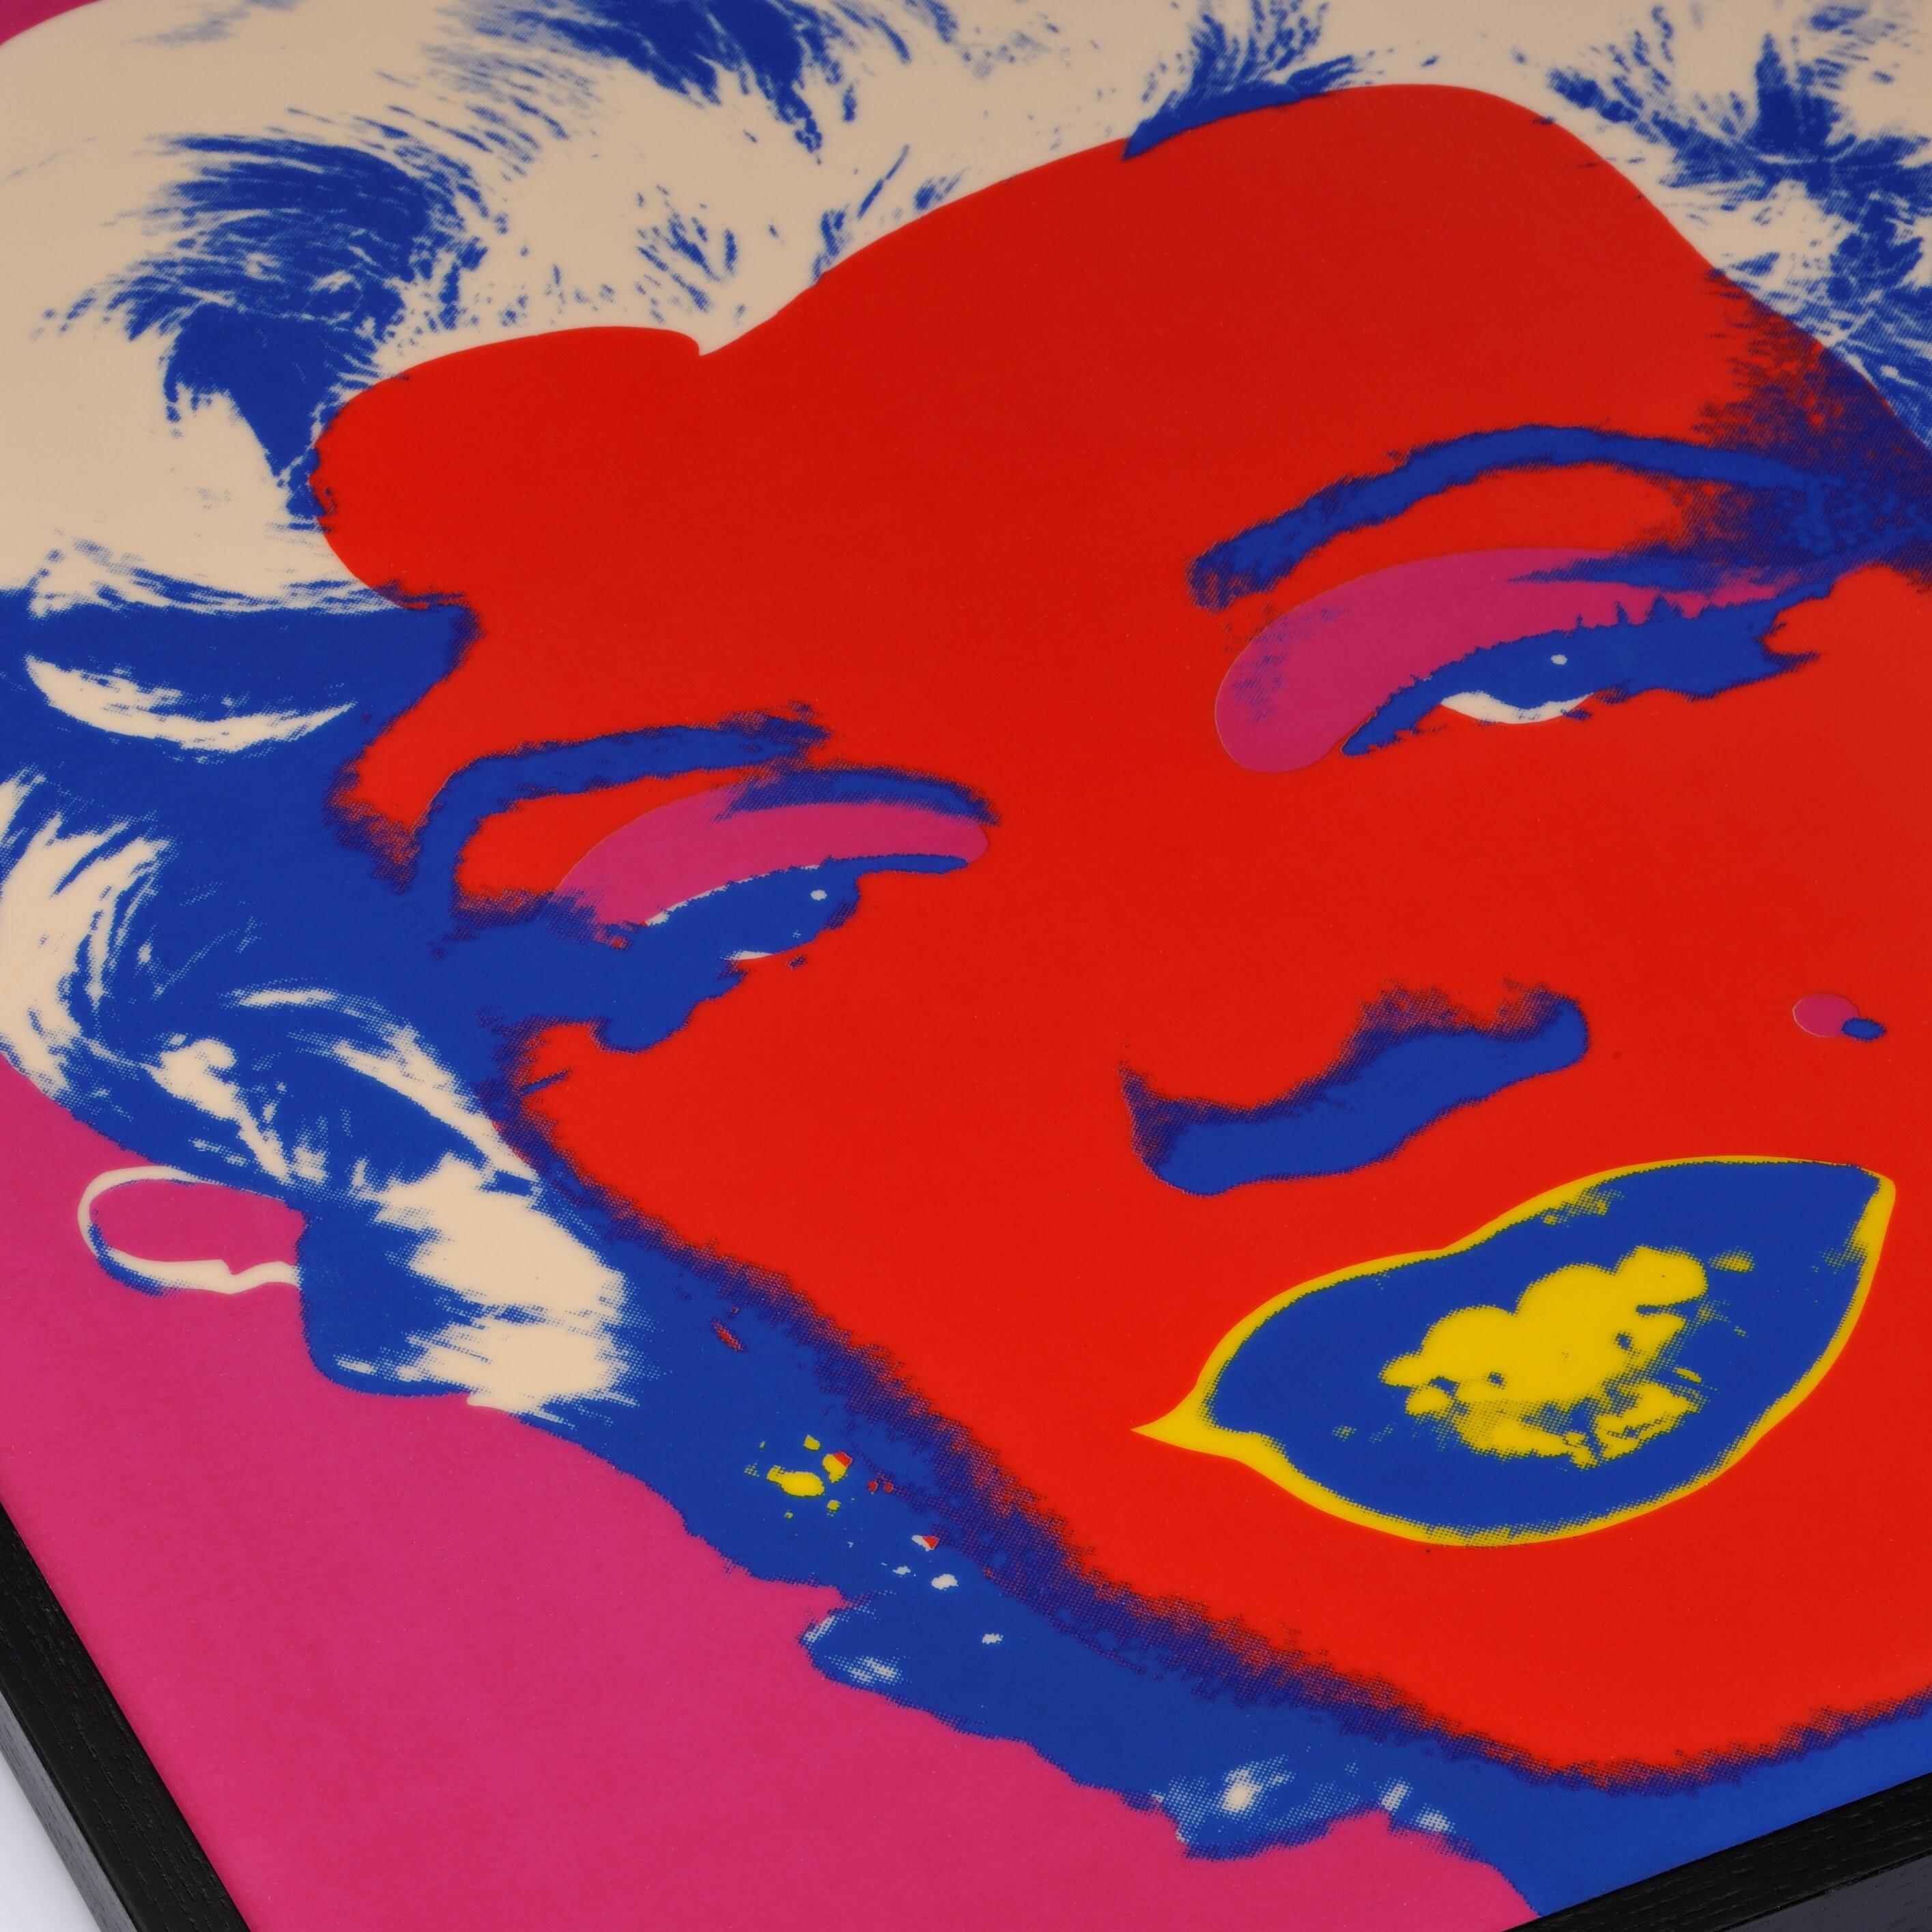 ANDY WARHOL (after)
Marilyn Purple-Red, 2010
Enamel on porcelain
Edition of 49
51 x 51 cm (20.1 x 20.1 in.)
Signed in glaze, numbered on the reverse on label In wooden box, accompanied by Certificate of Authenticity from the Rosenthal Studio in